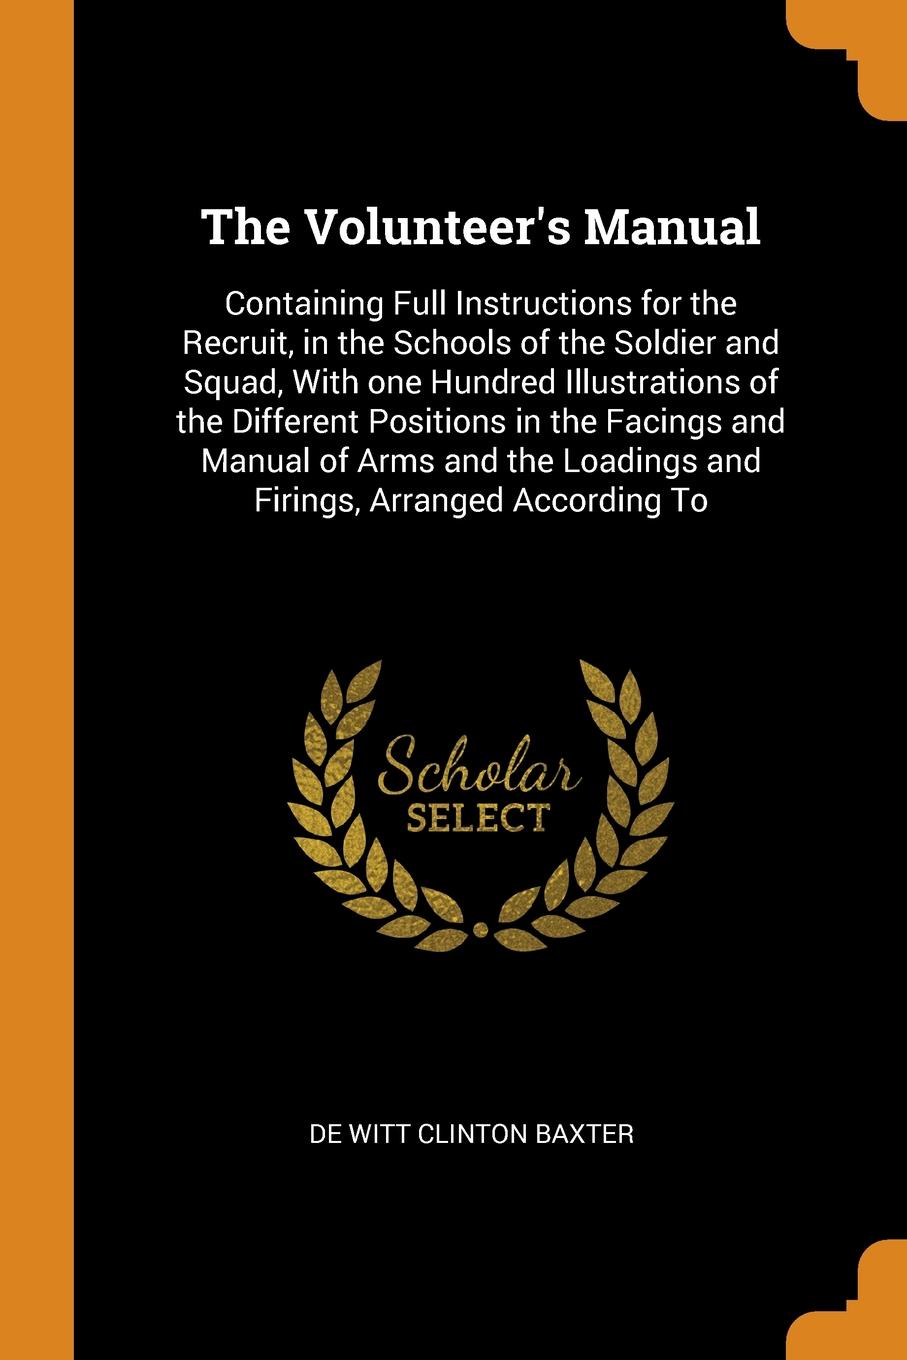 The Volunteer`s Manual. Containing Full Instructions for the Recruit, in the Schools of the Soldier and Squad, With one Hundred Illustrations of the Different Positions in the Facings and Manual of Arms and the Loadings and Firings, Arranged Accor...